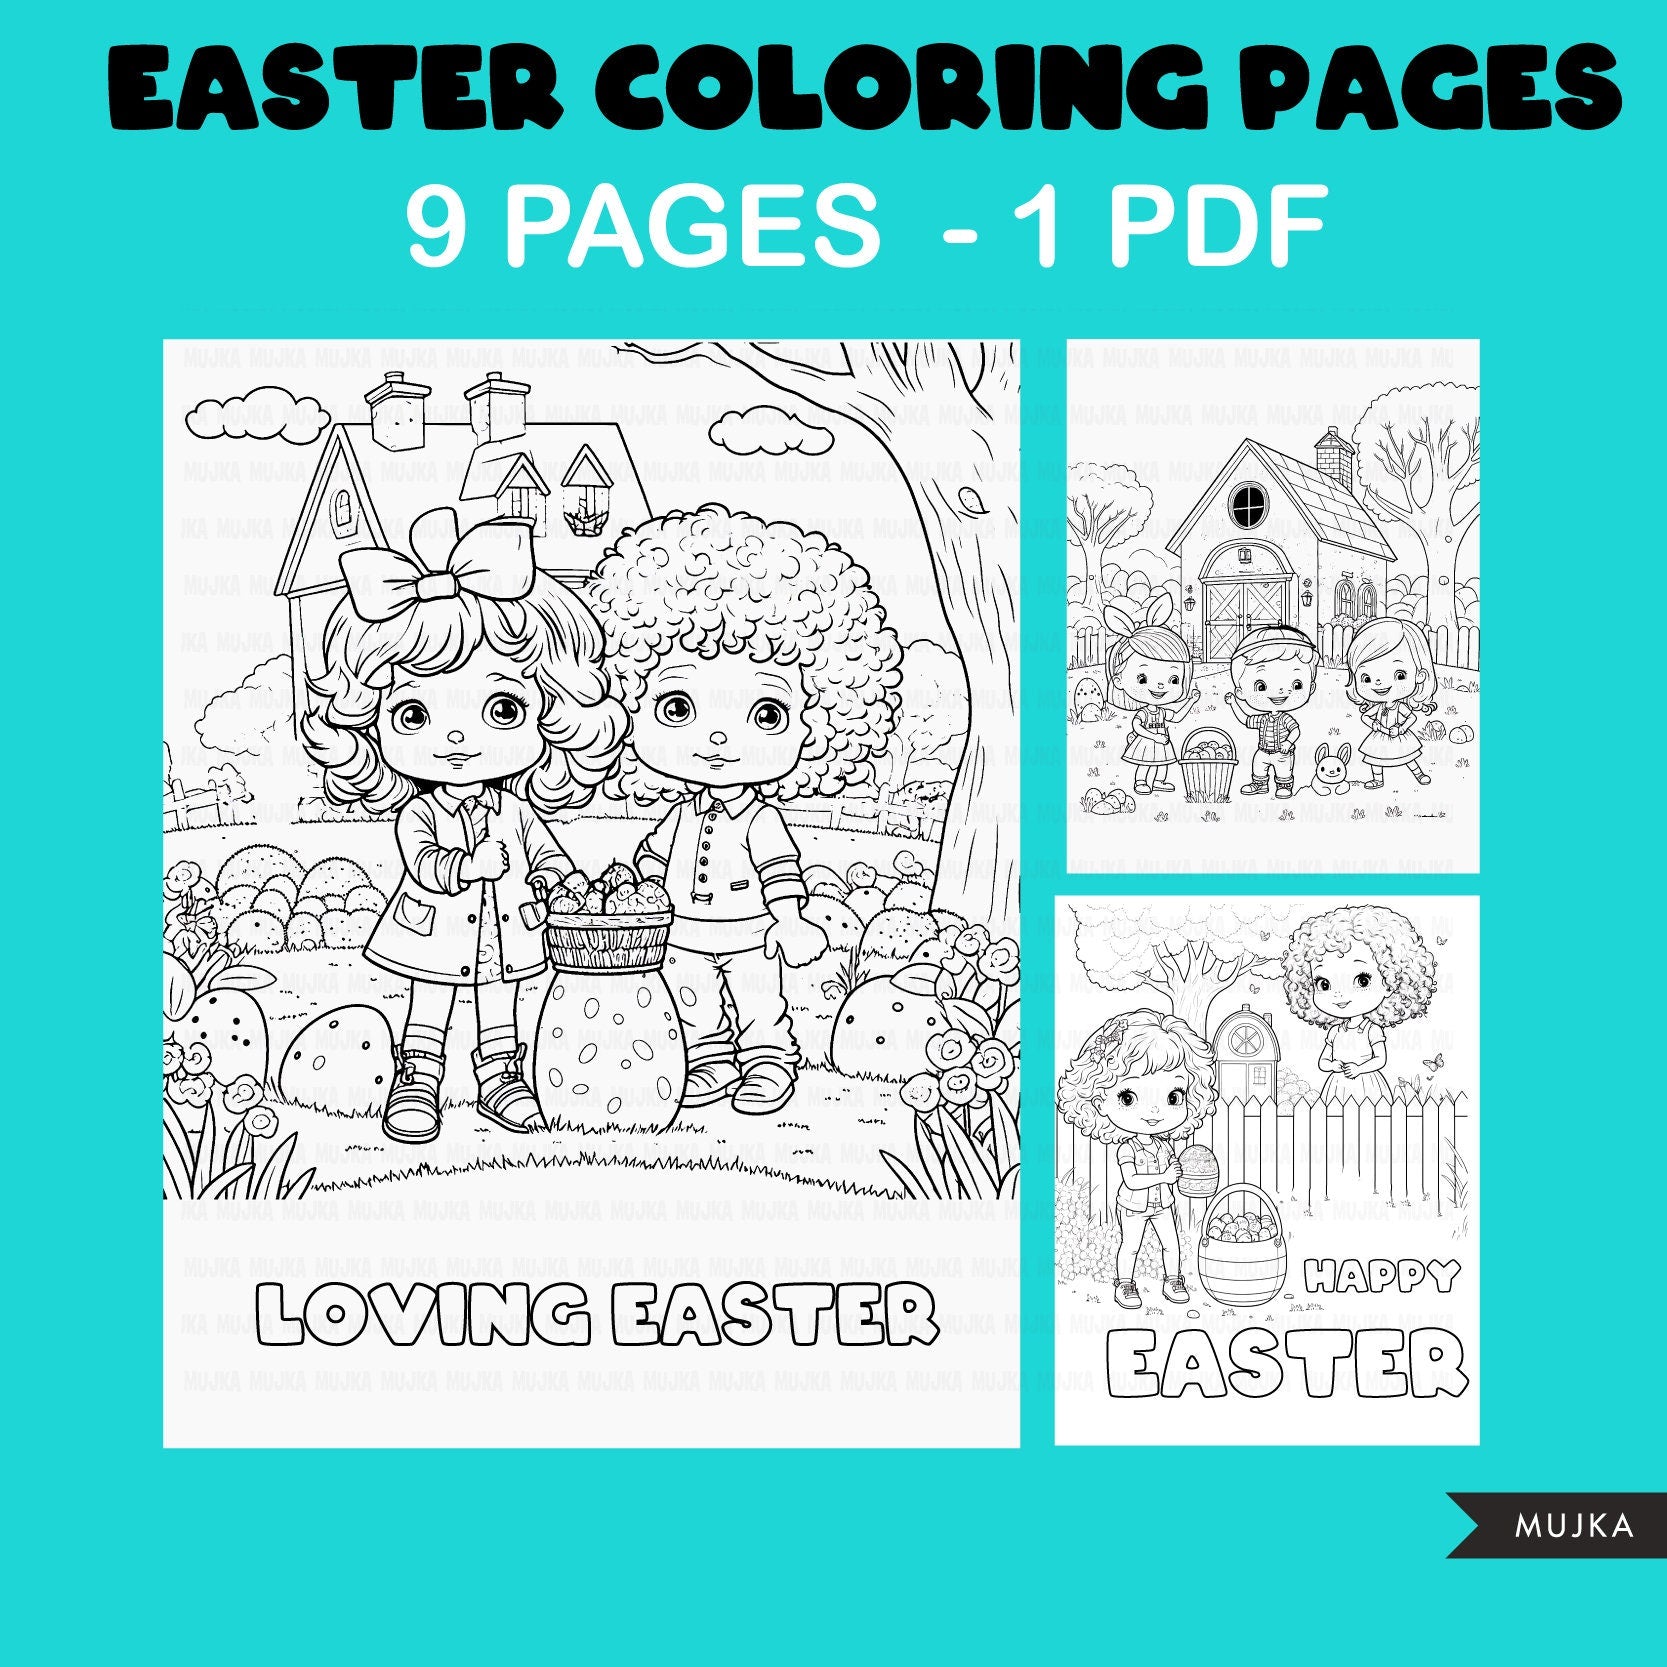 Easter Coloring Pages, Easter Activity for kids, Spring Coloring Pages, Scavenger Hunt Coloring Book, Printable Coloring Pages, PDF sheets